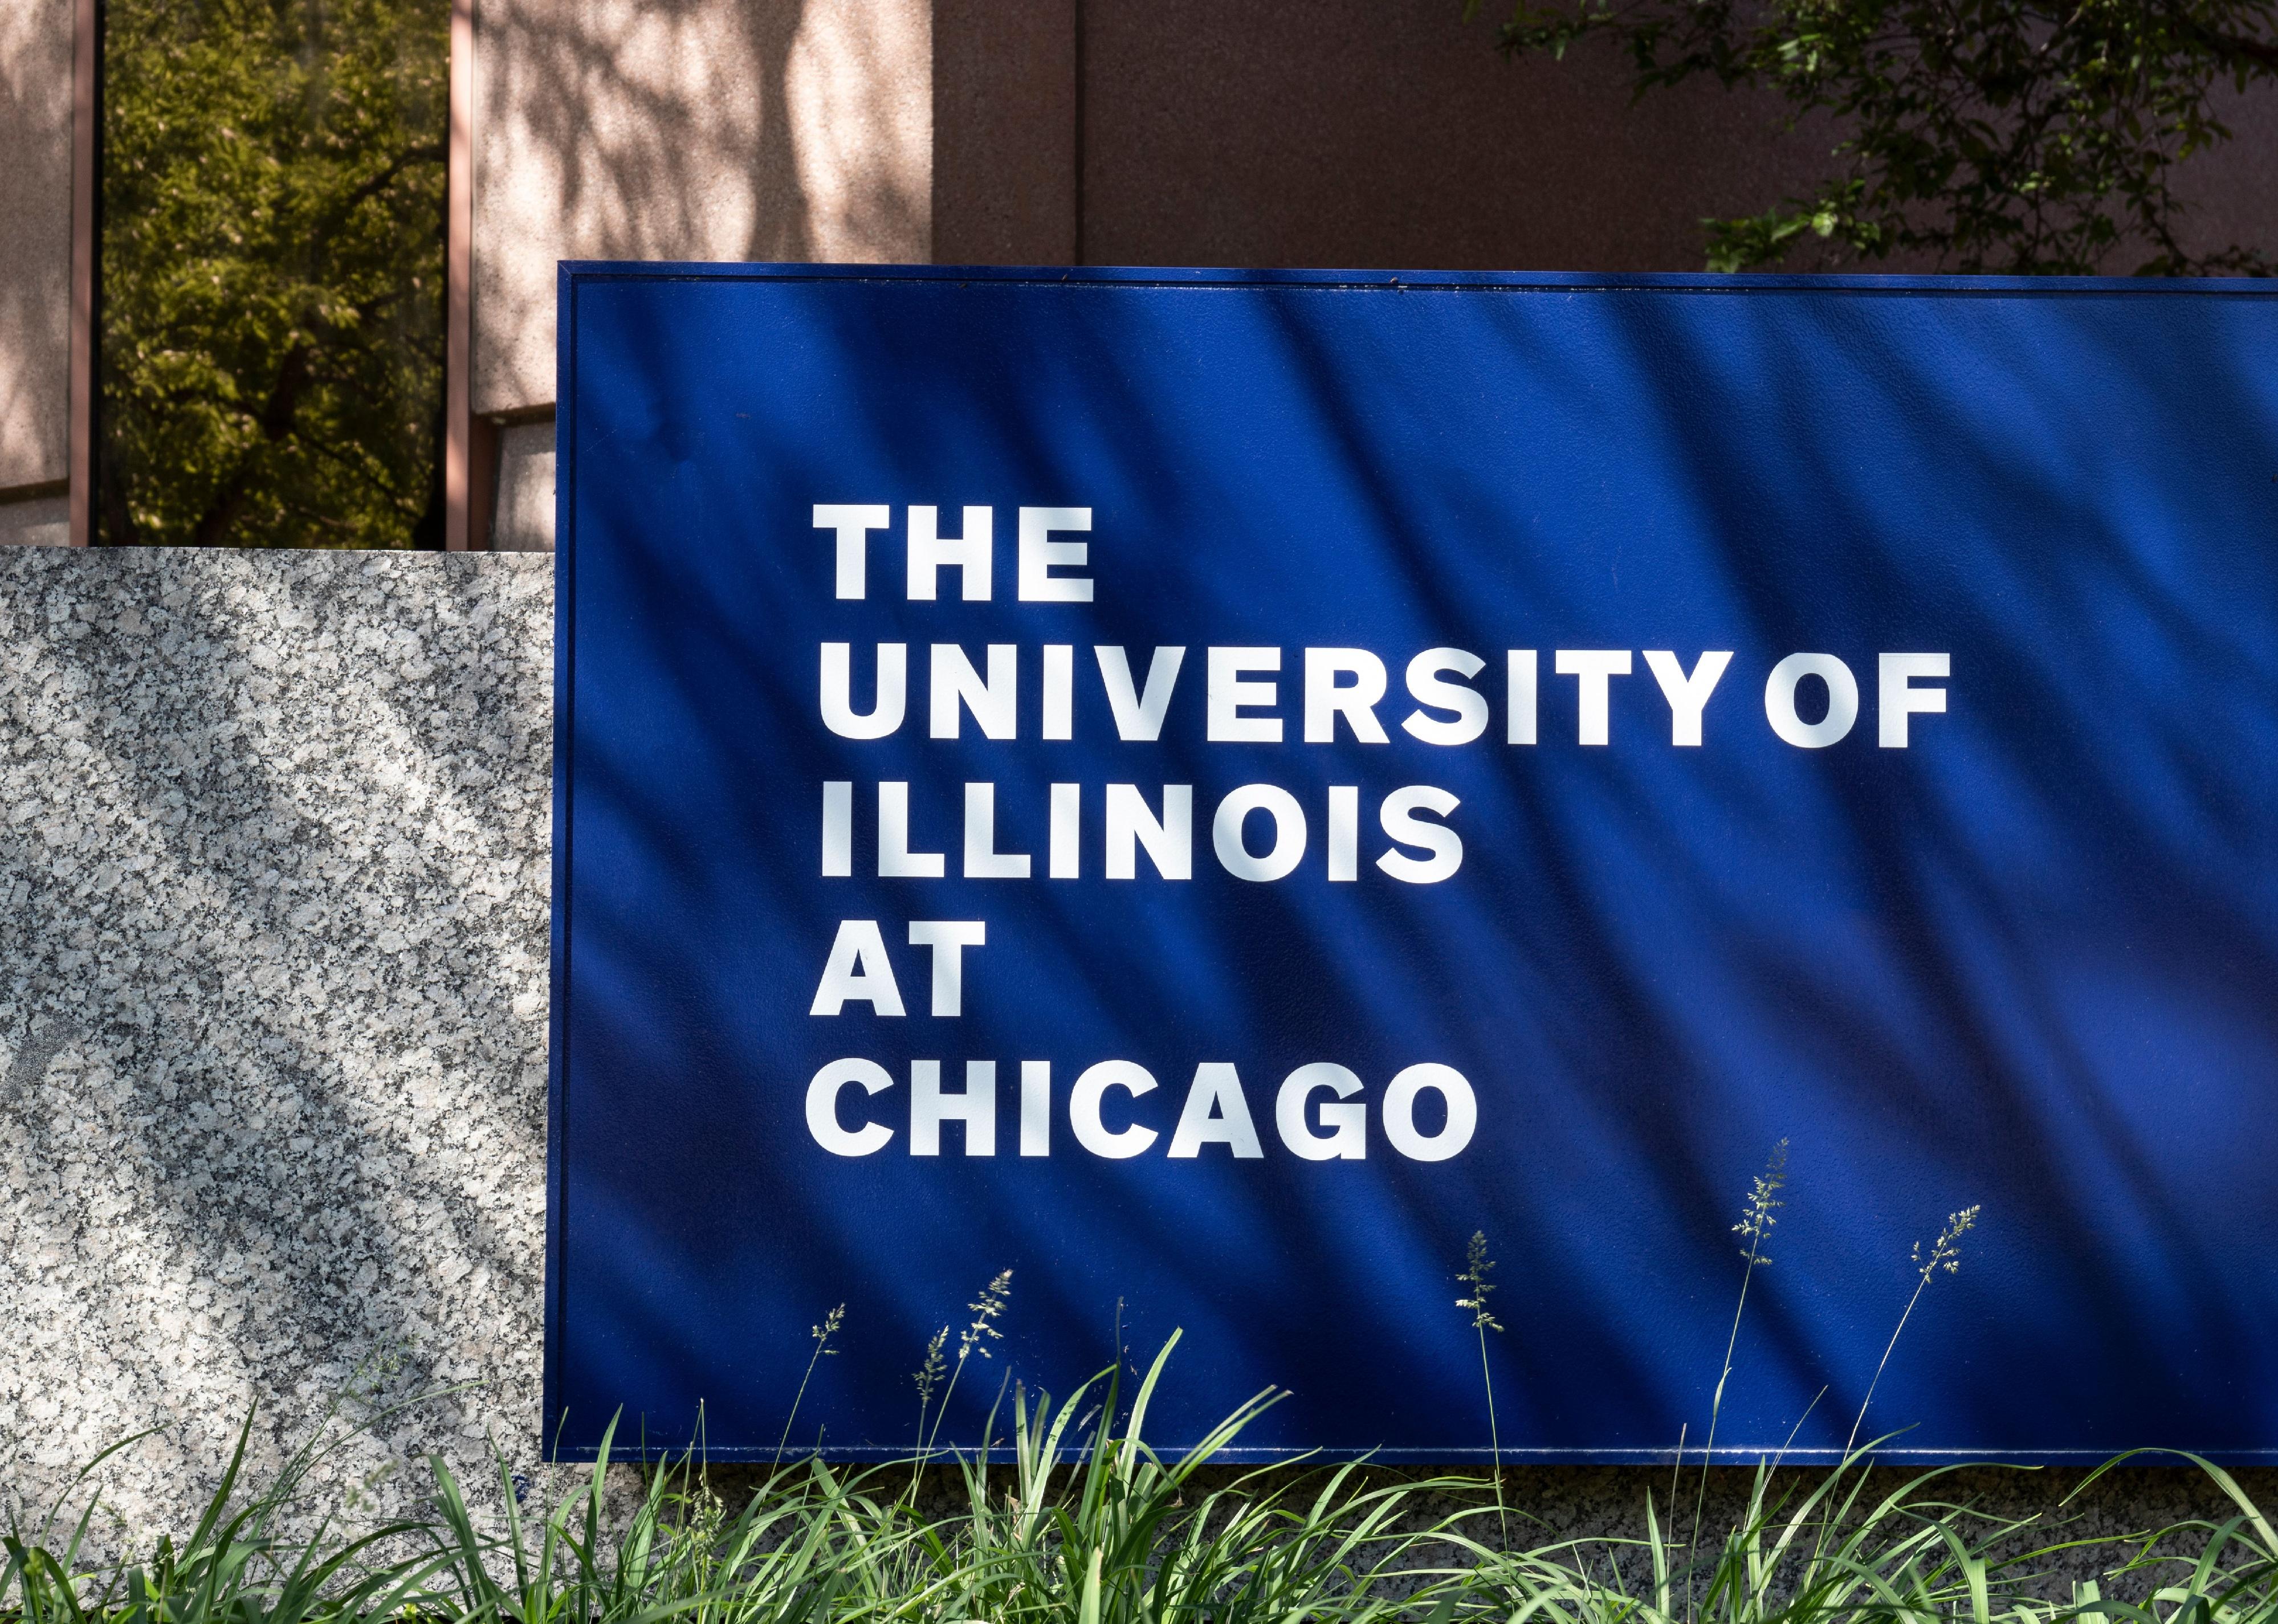 A University of Illinois at Chicago blue sign.